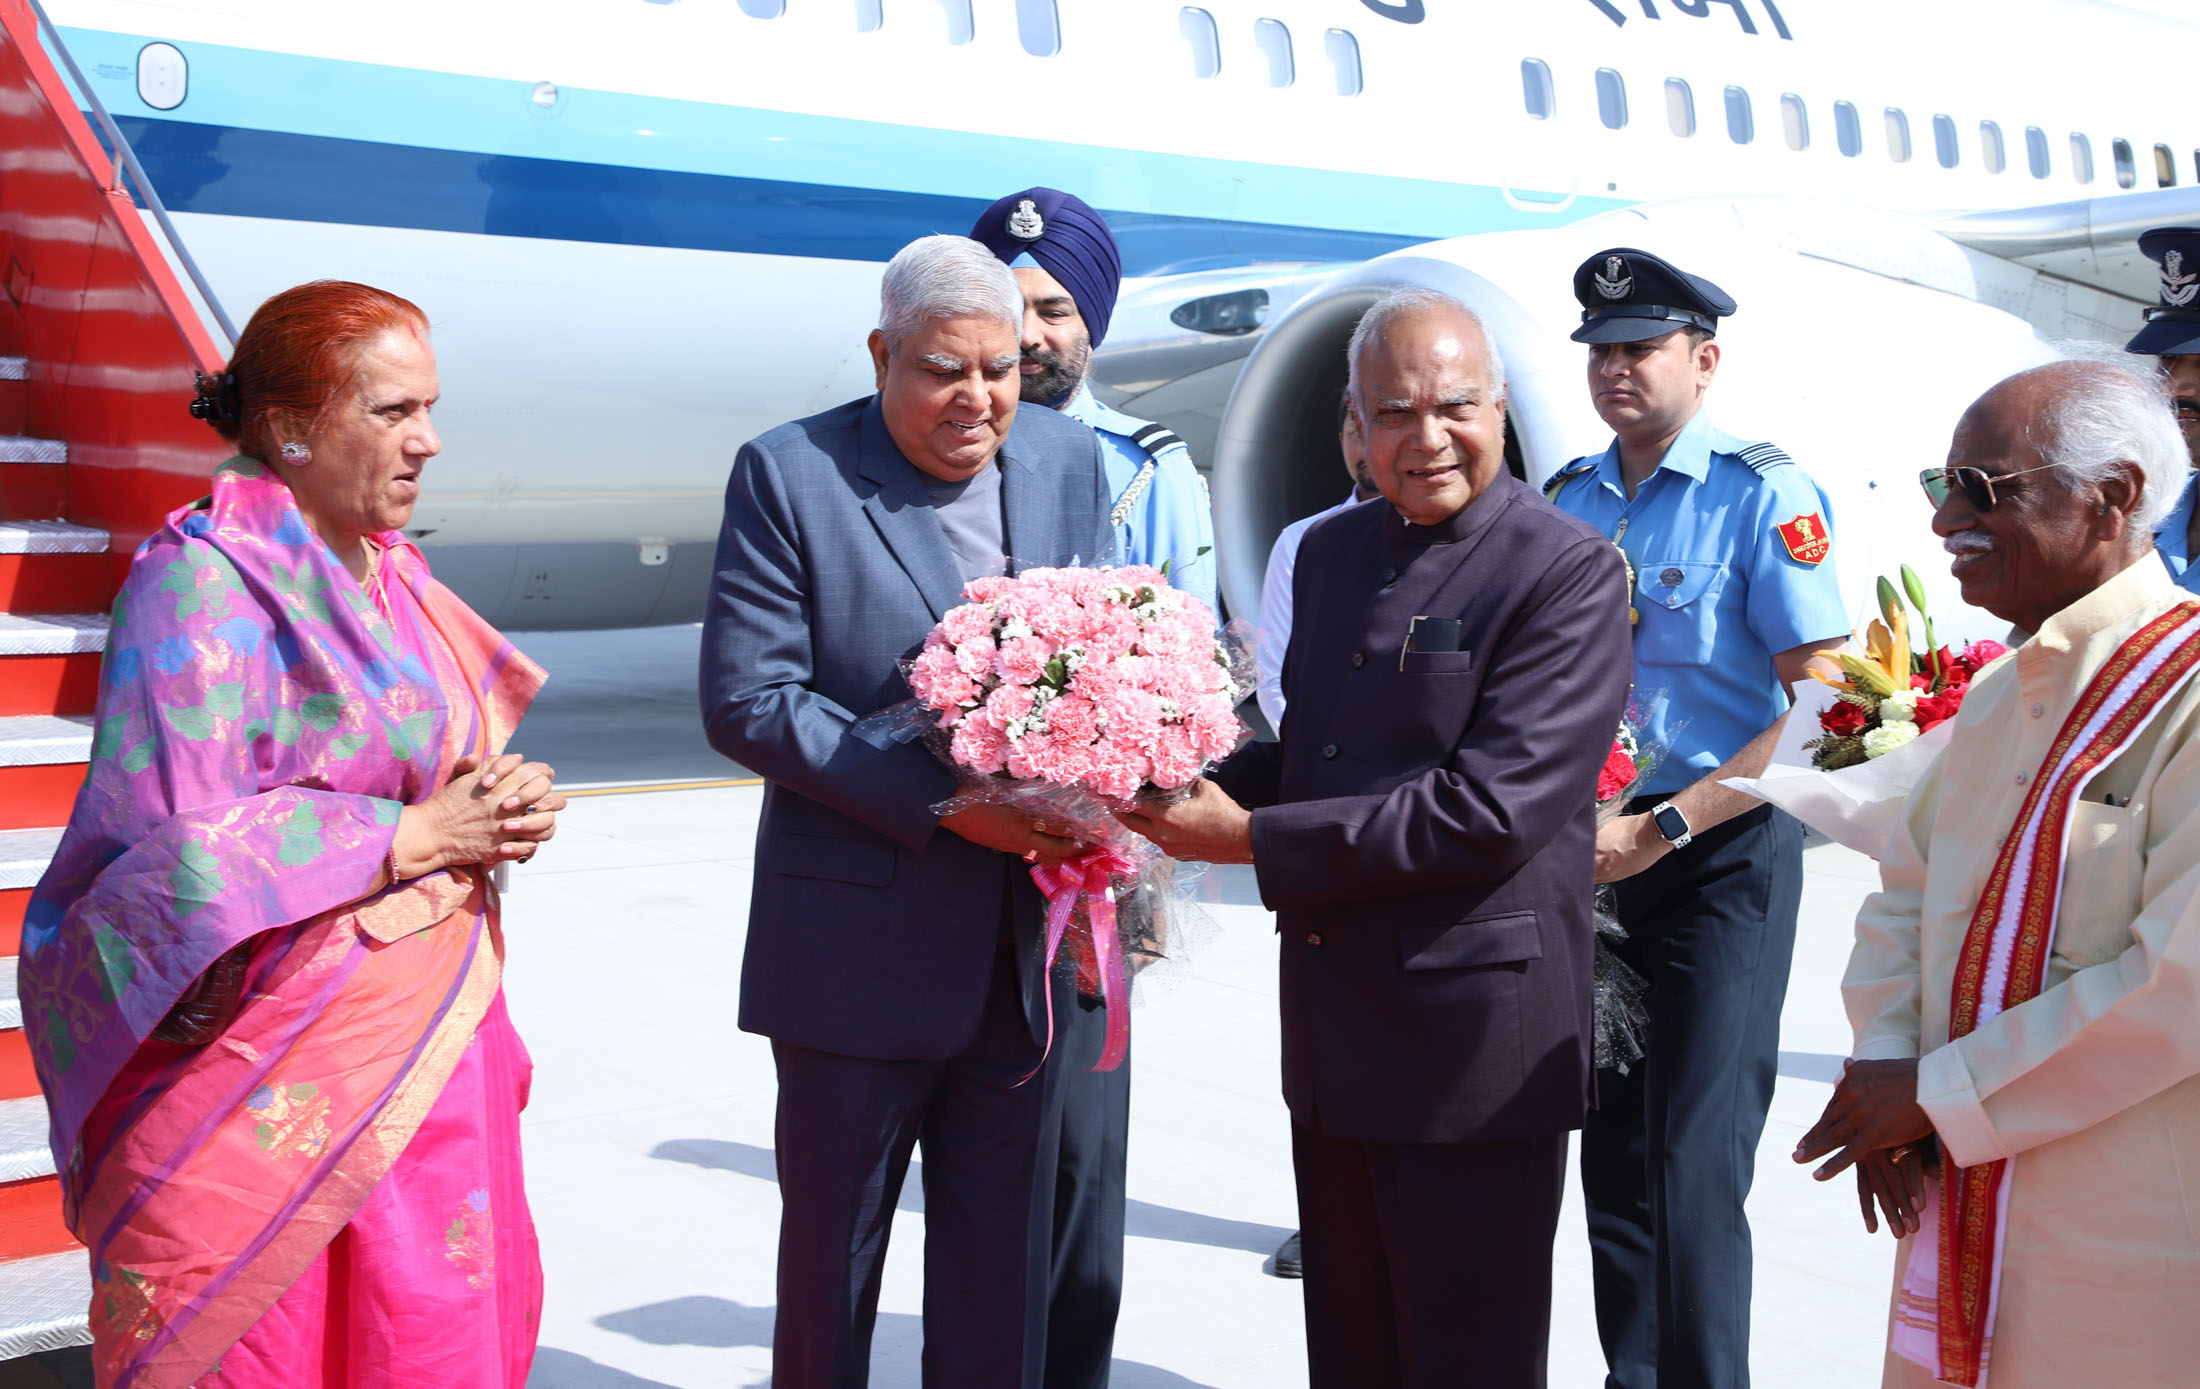 The Vice President, Shri Jagdeep Dhankhar, and Dr Sudesh Dhankhar being welcomed by Shri Banwarilal Purohit, Governor of Punjab and Shri Bandaru Dattatreya, Governor of Haryana in Chandigarh on May 20, 2023.